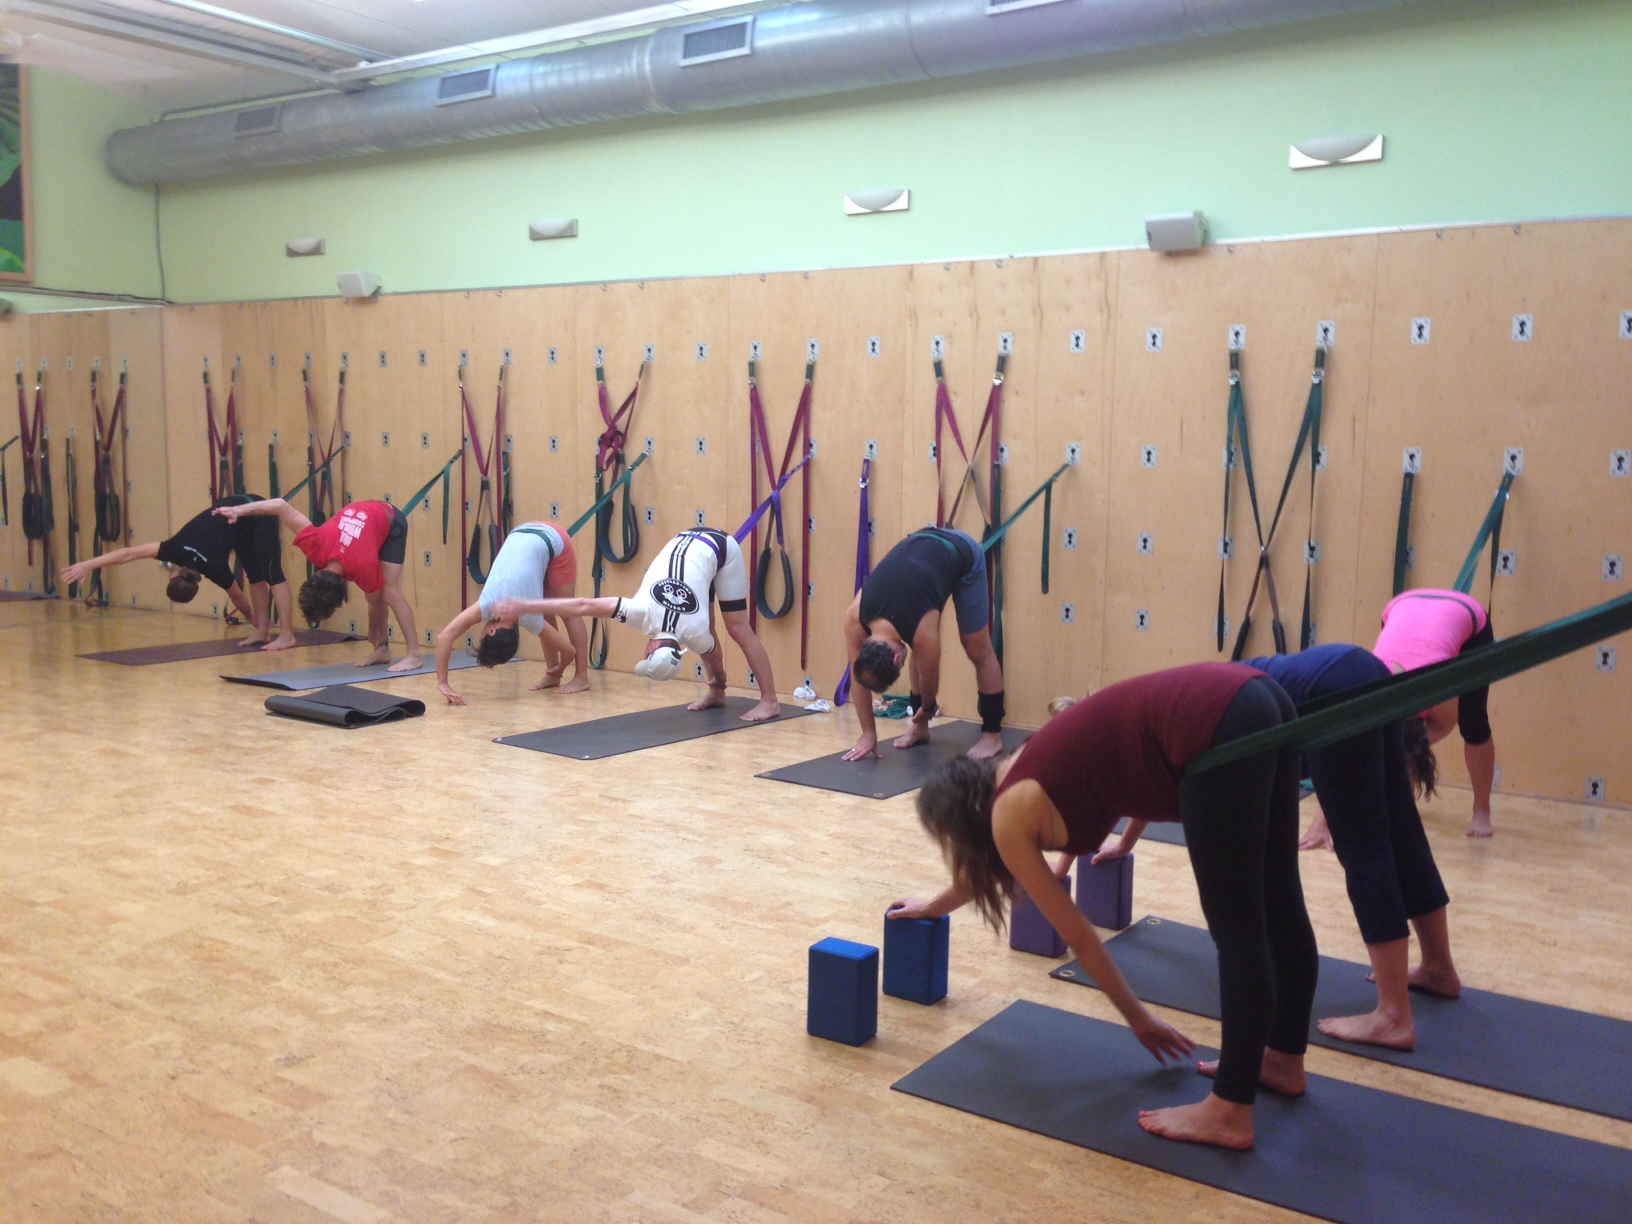 Yoga Wall class led by Castle Hill instructor Gillian Barksdale